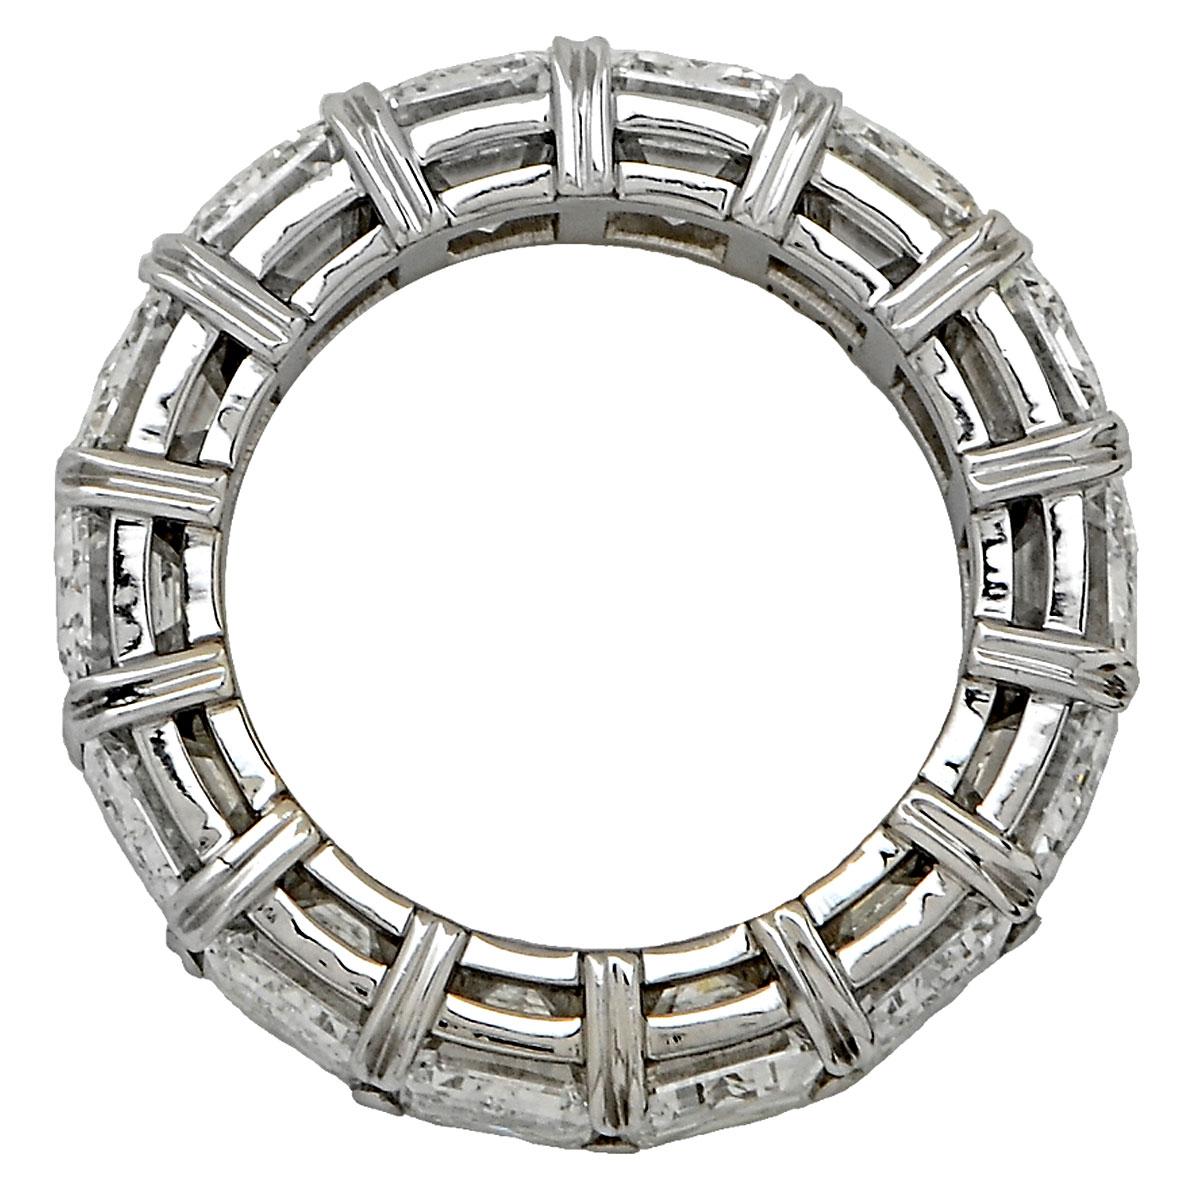 Vivid Diamonds eternity band crafted by hand in platinum, showcasing 15 spectacular GIA certified emerald cut diamonds weighing 15.18 carats total, G-H color, Internally Flawless-VVS2 clarity. Each diamond was carefully selected, perfectly matched